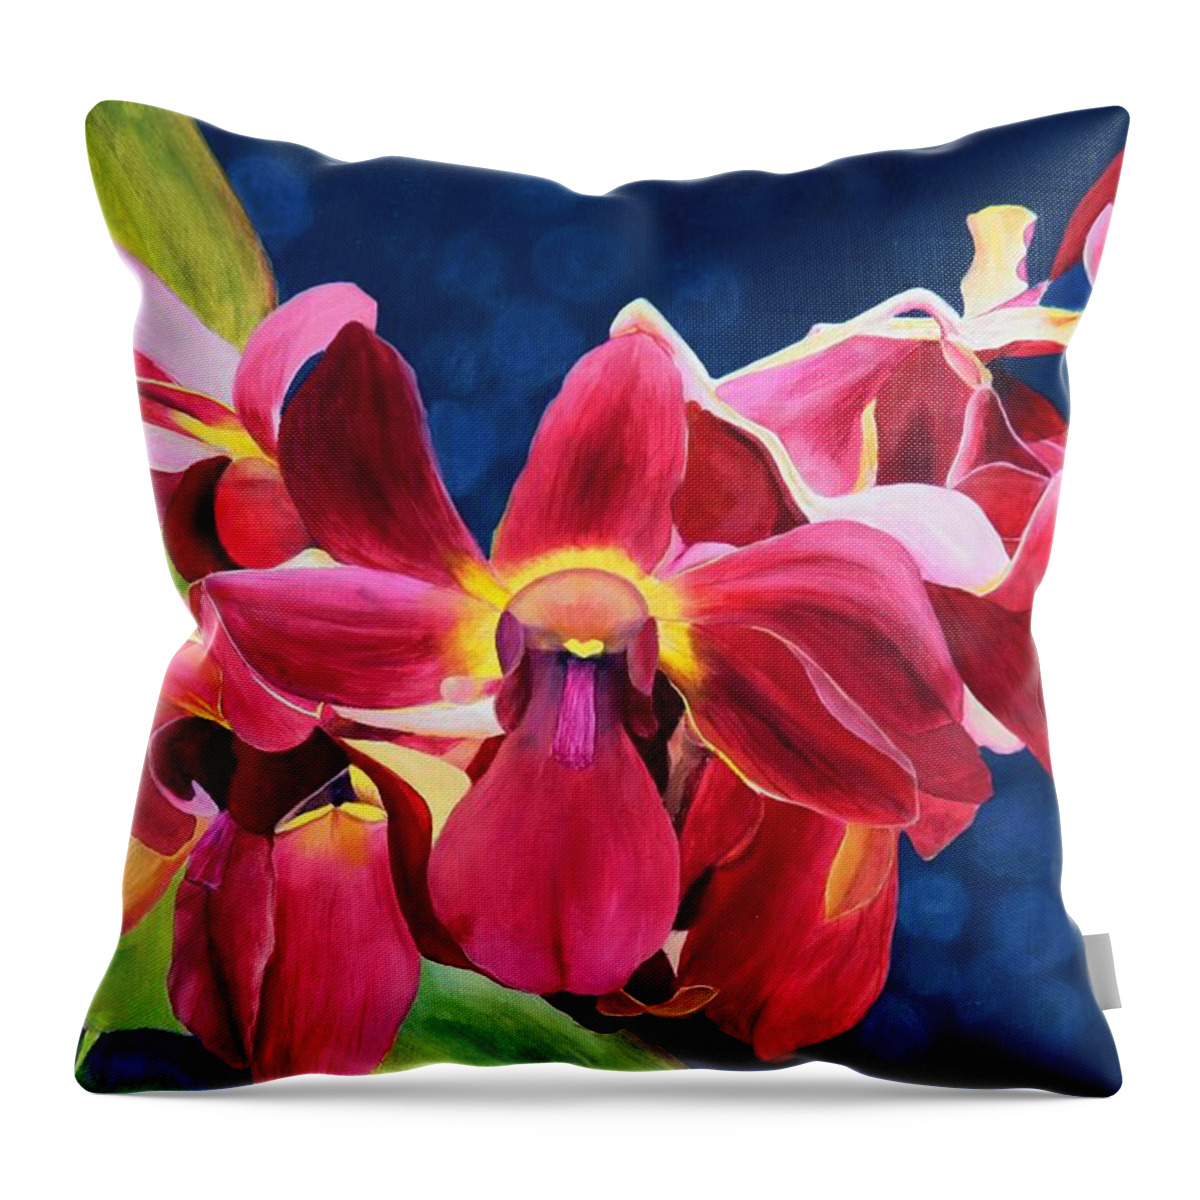 Art Throw Pillow featuring the painting Tom's Orchid by Mishel Vanderten